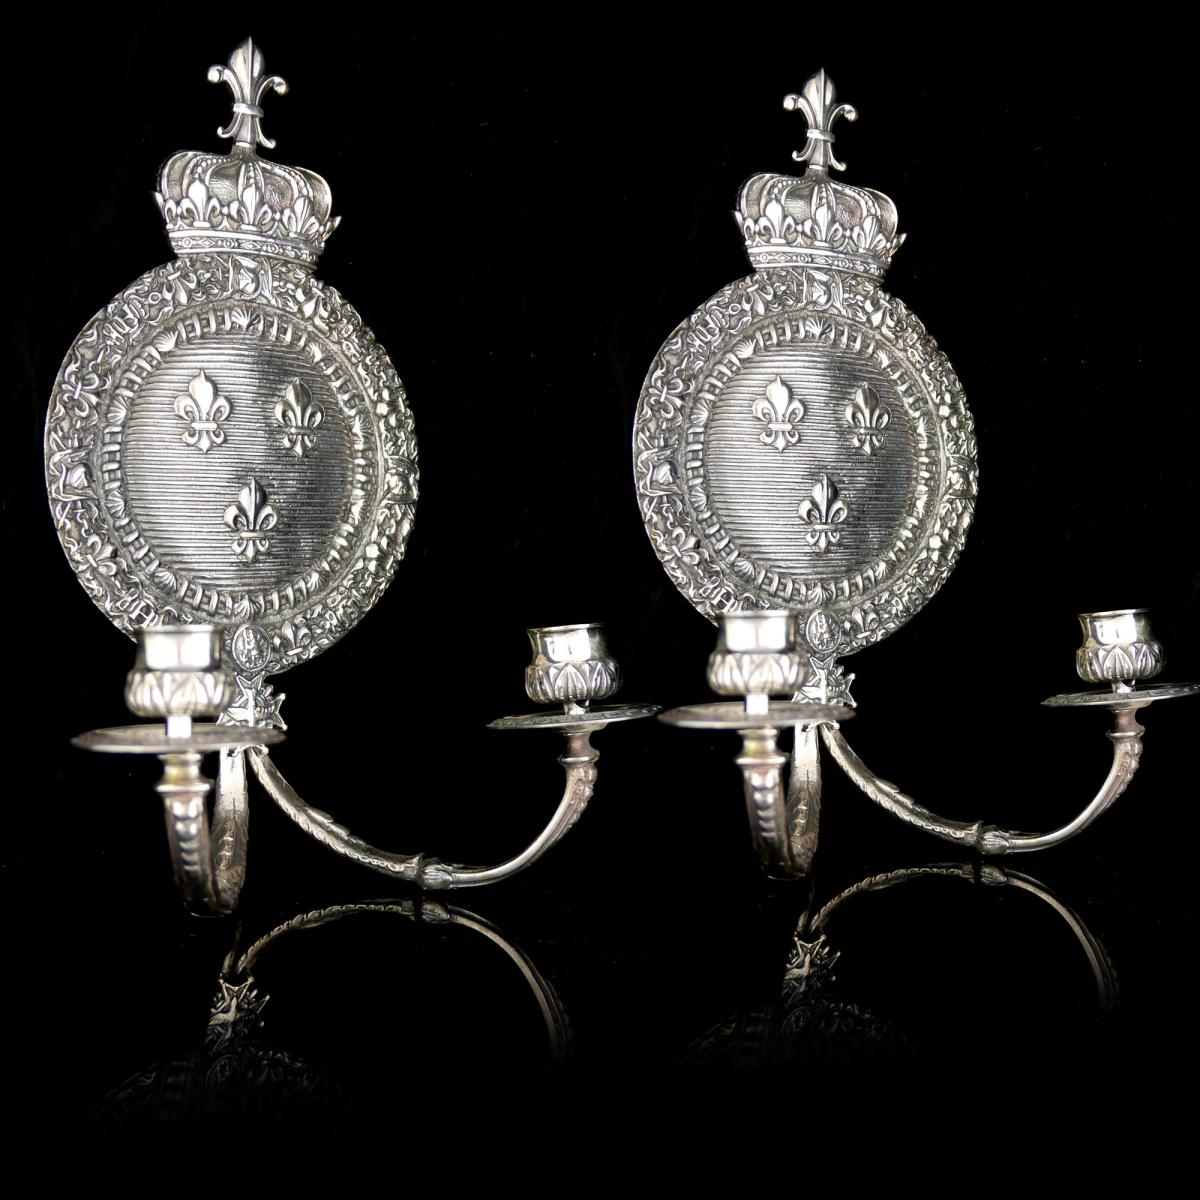 A Pair of French Renaissance Revival Wall Sconces, 1880